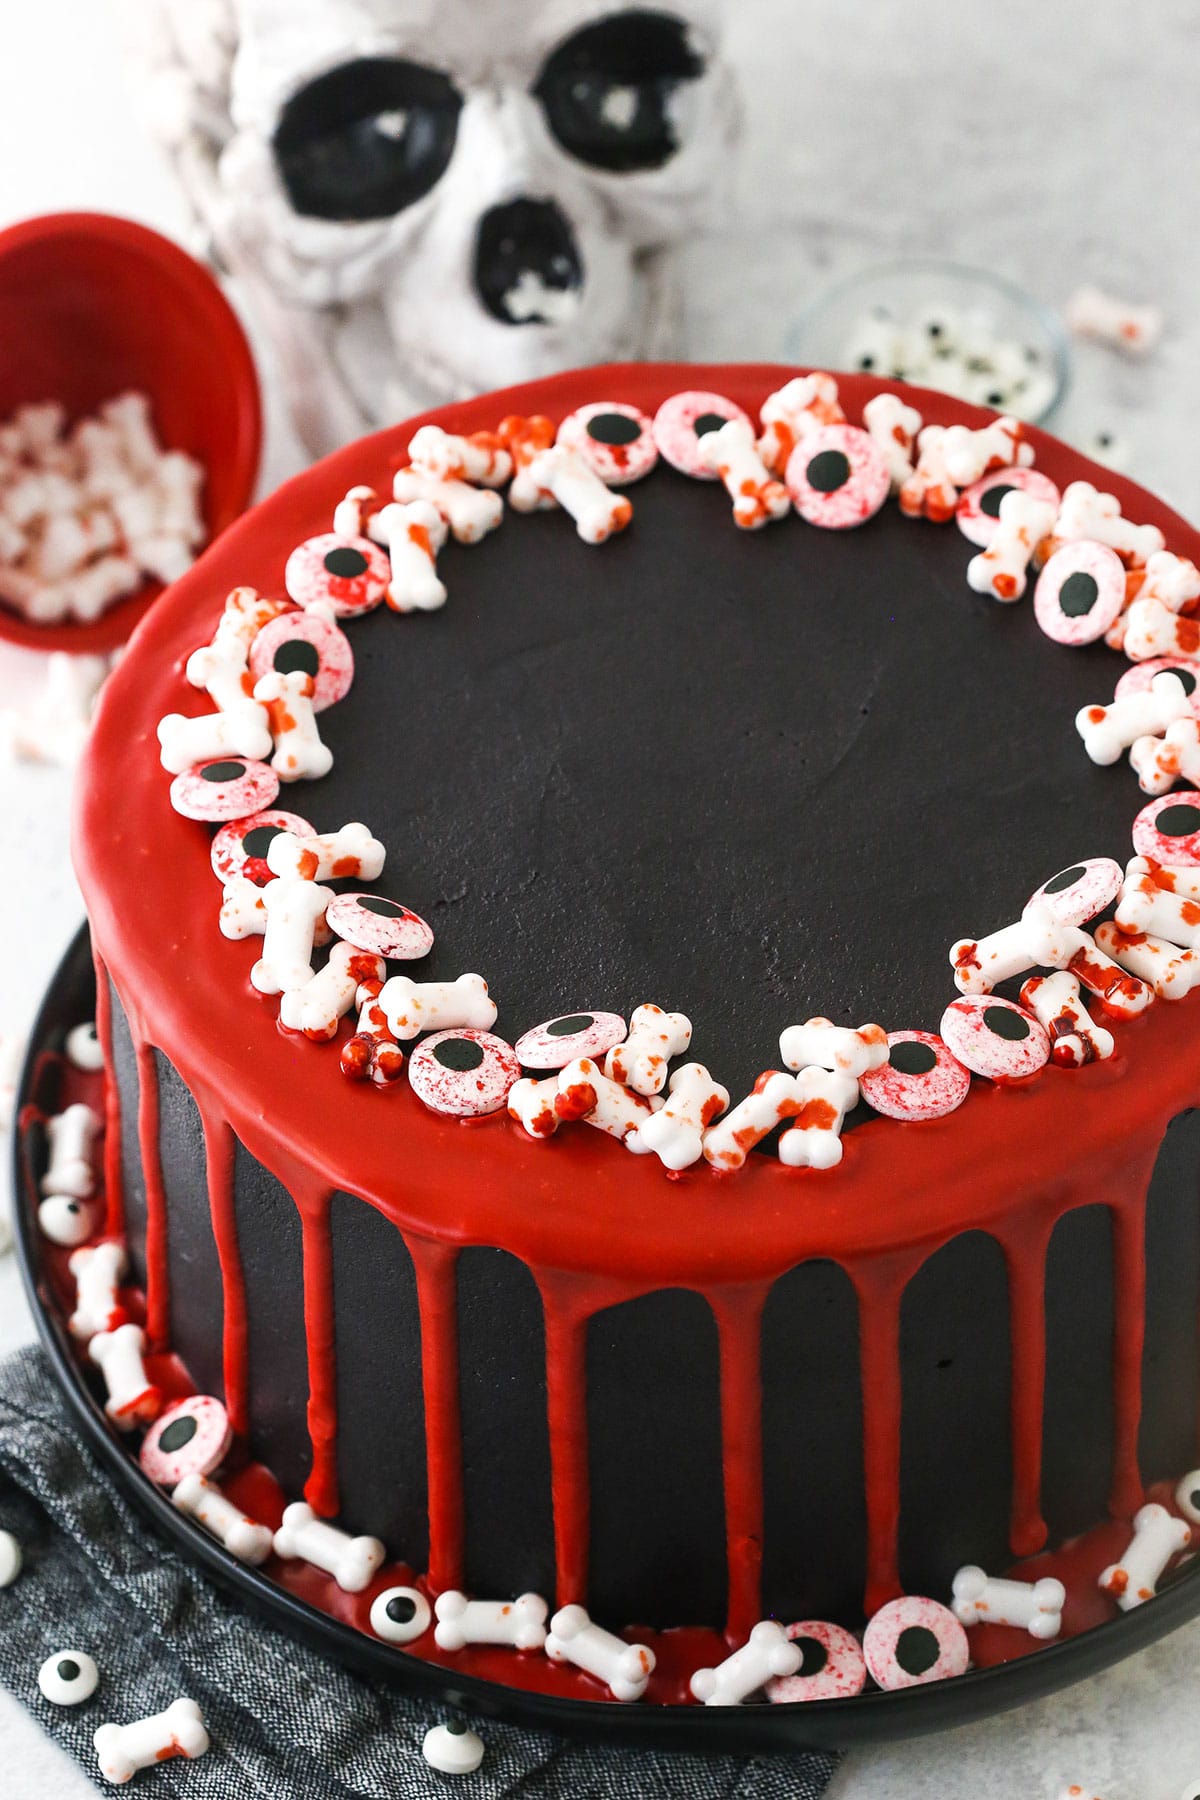 5 Spooky Halloween Cakes Ideas For Your NYC Celebration